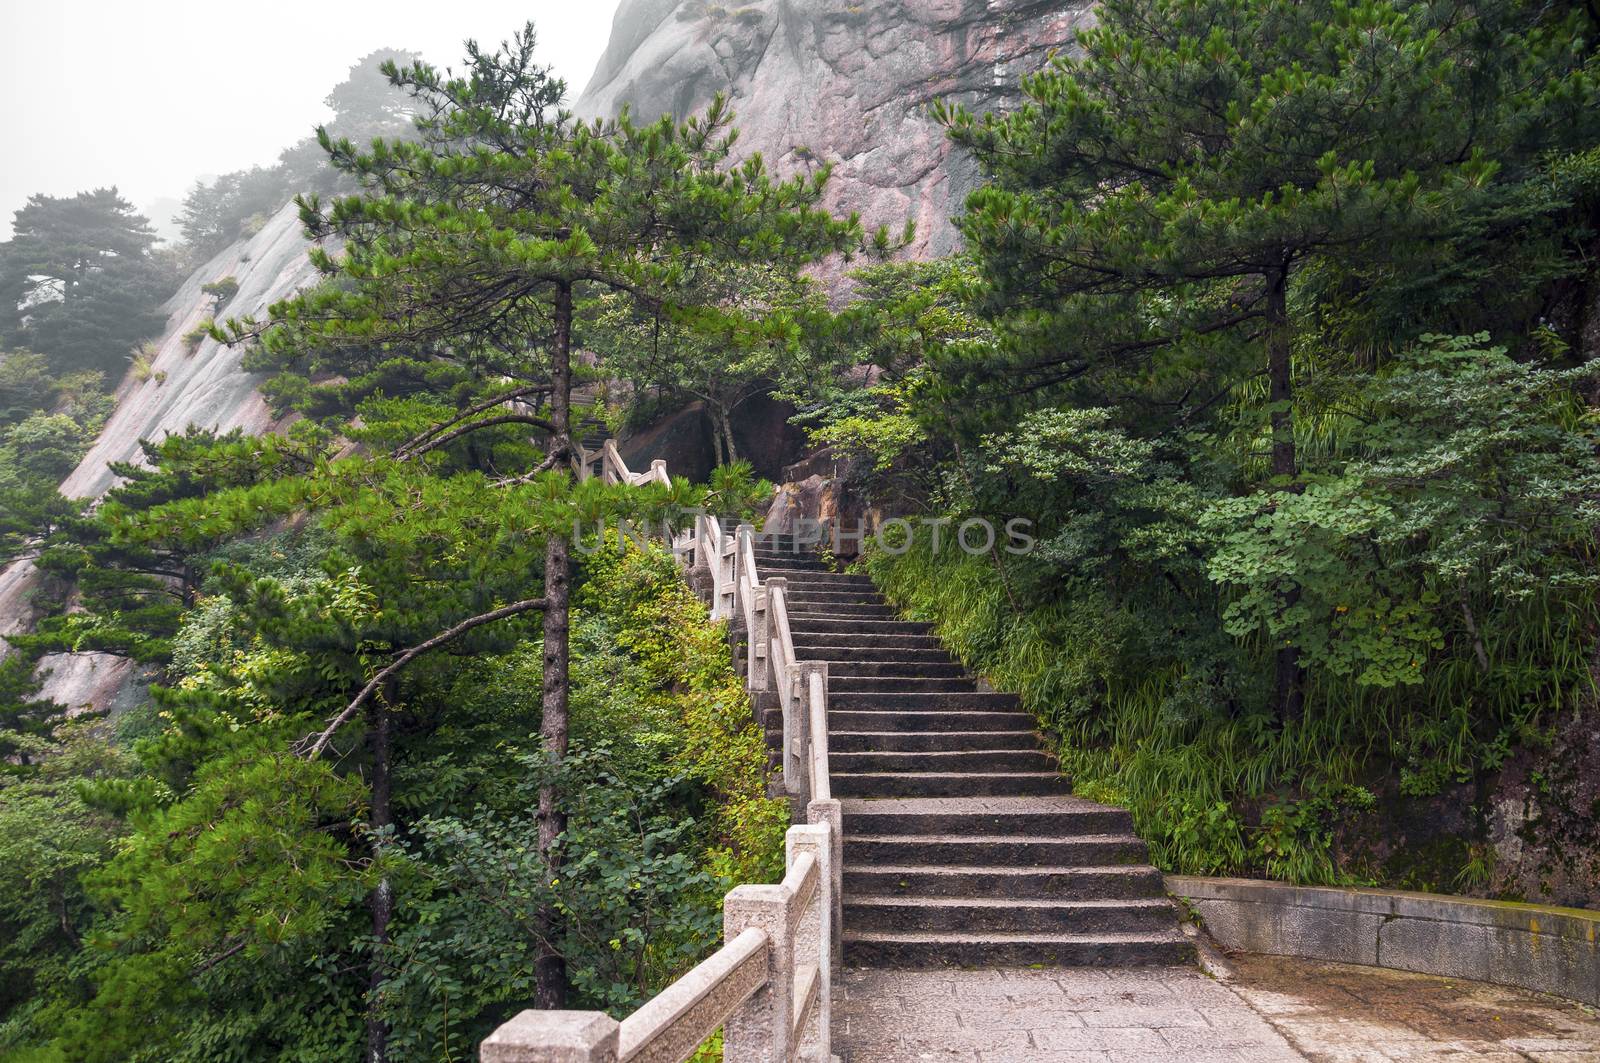 Huangshan mountain stairs path into forest by rigamondis